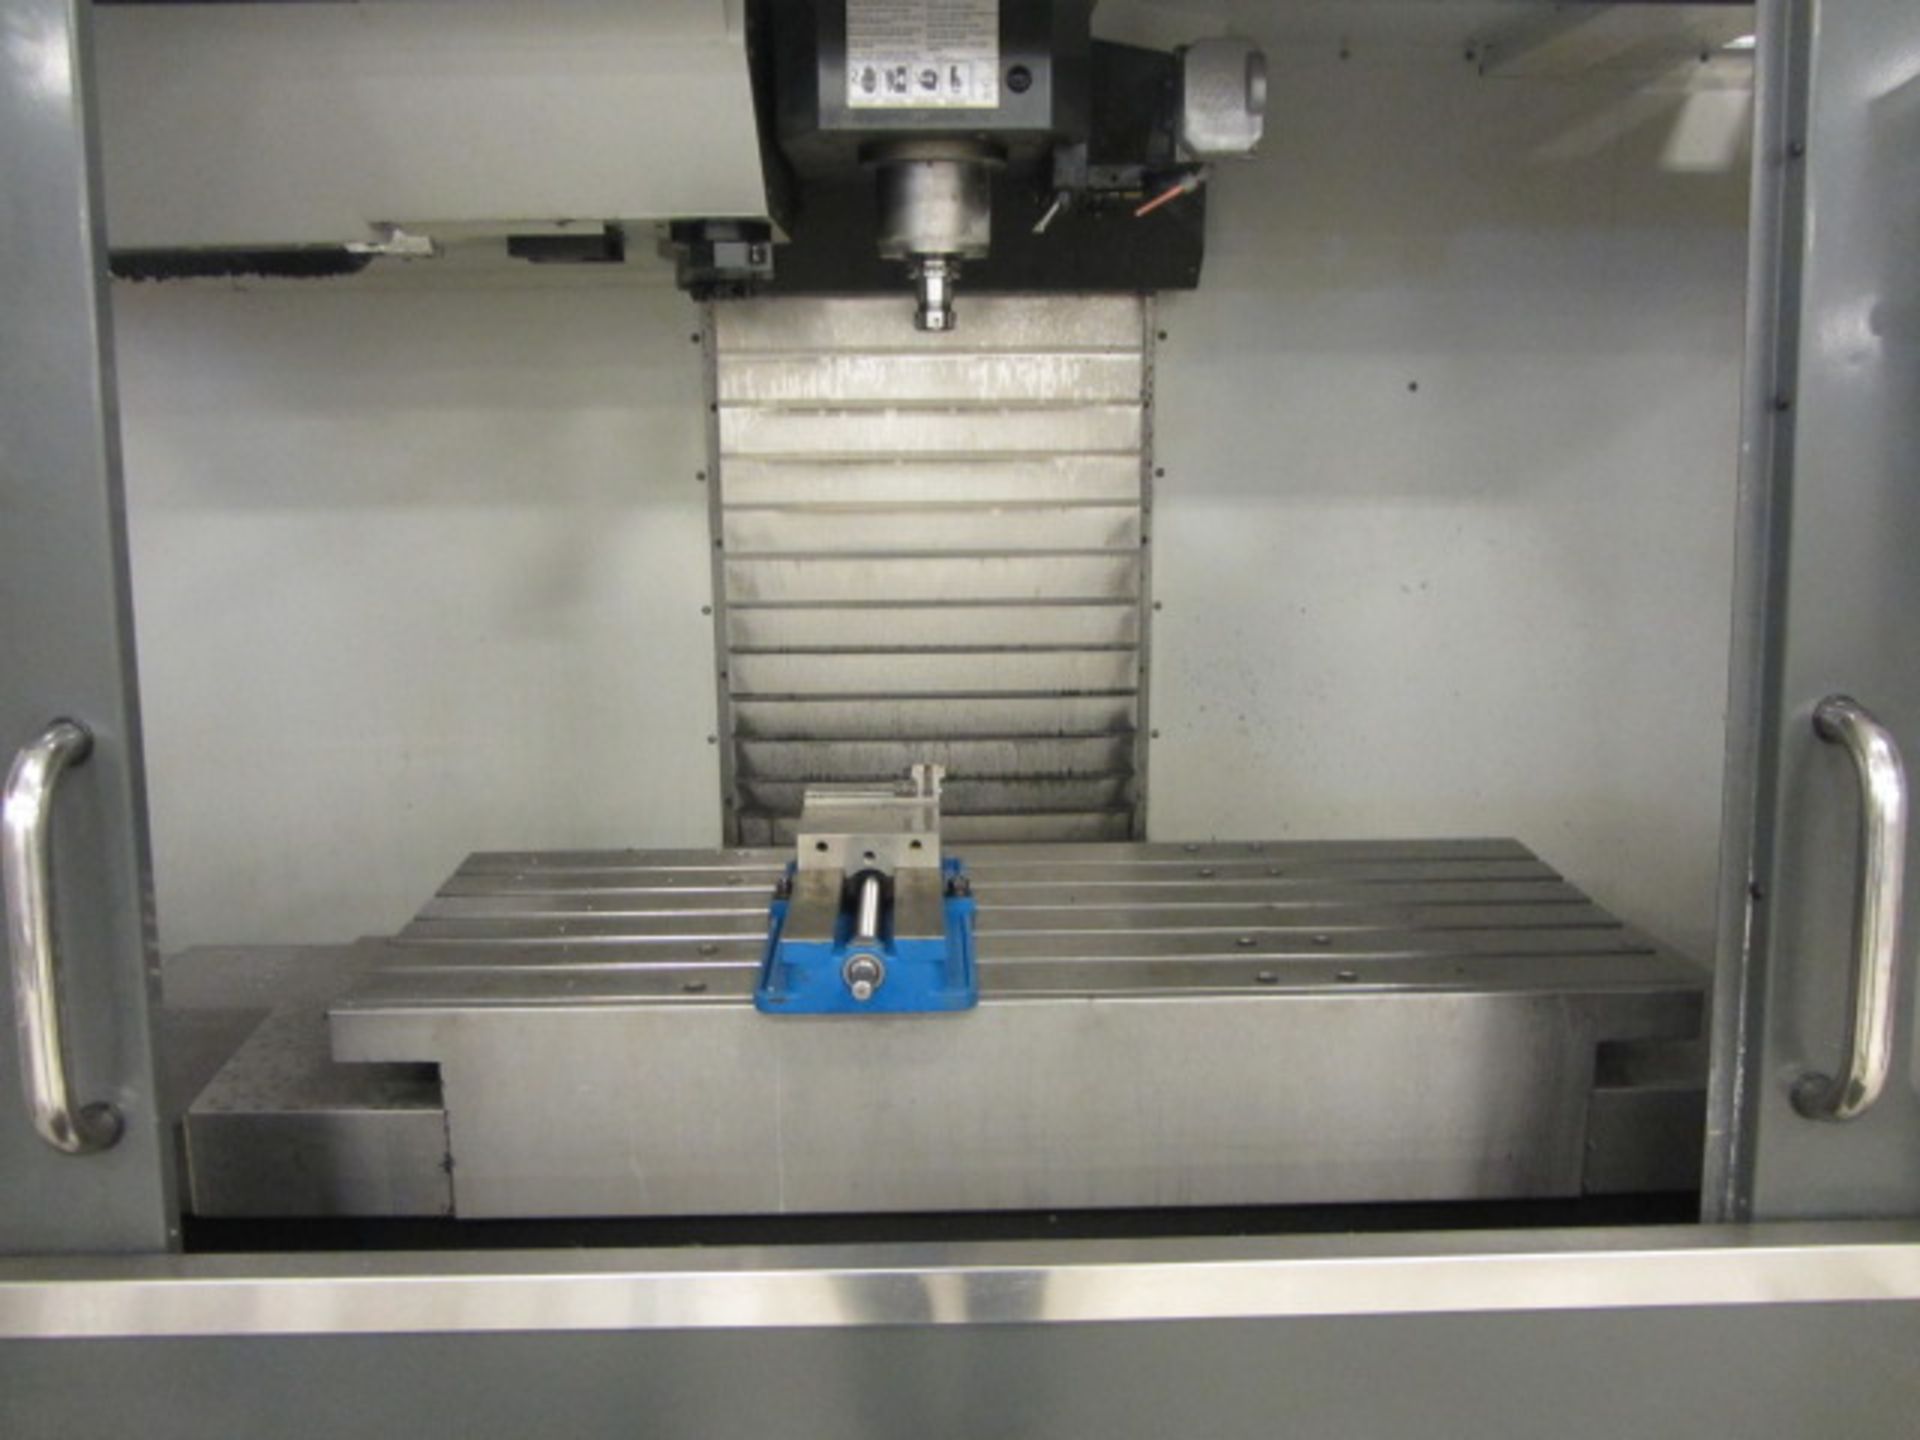 Haas VF-4 CNC Vertical Machining Center with 52'' x 18'' Table, #40 Taper Spindle Speeds to 8100 - Image 3 of 9